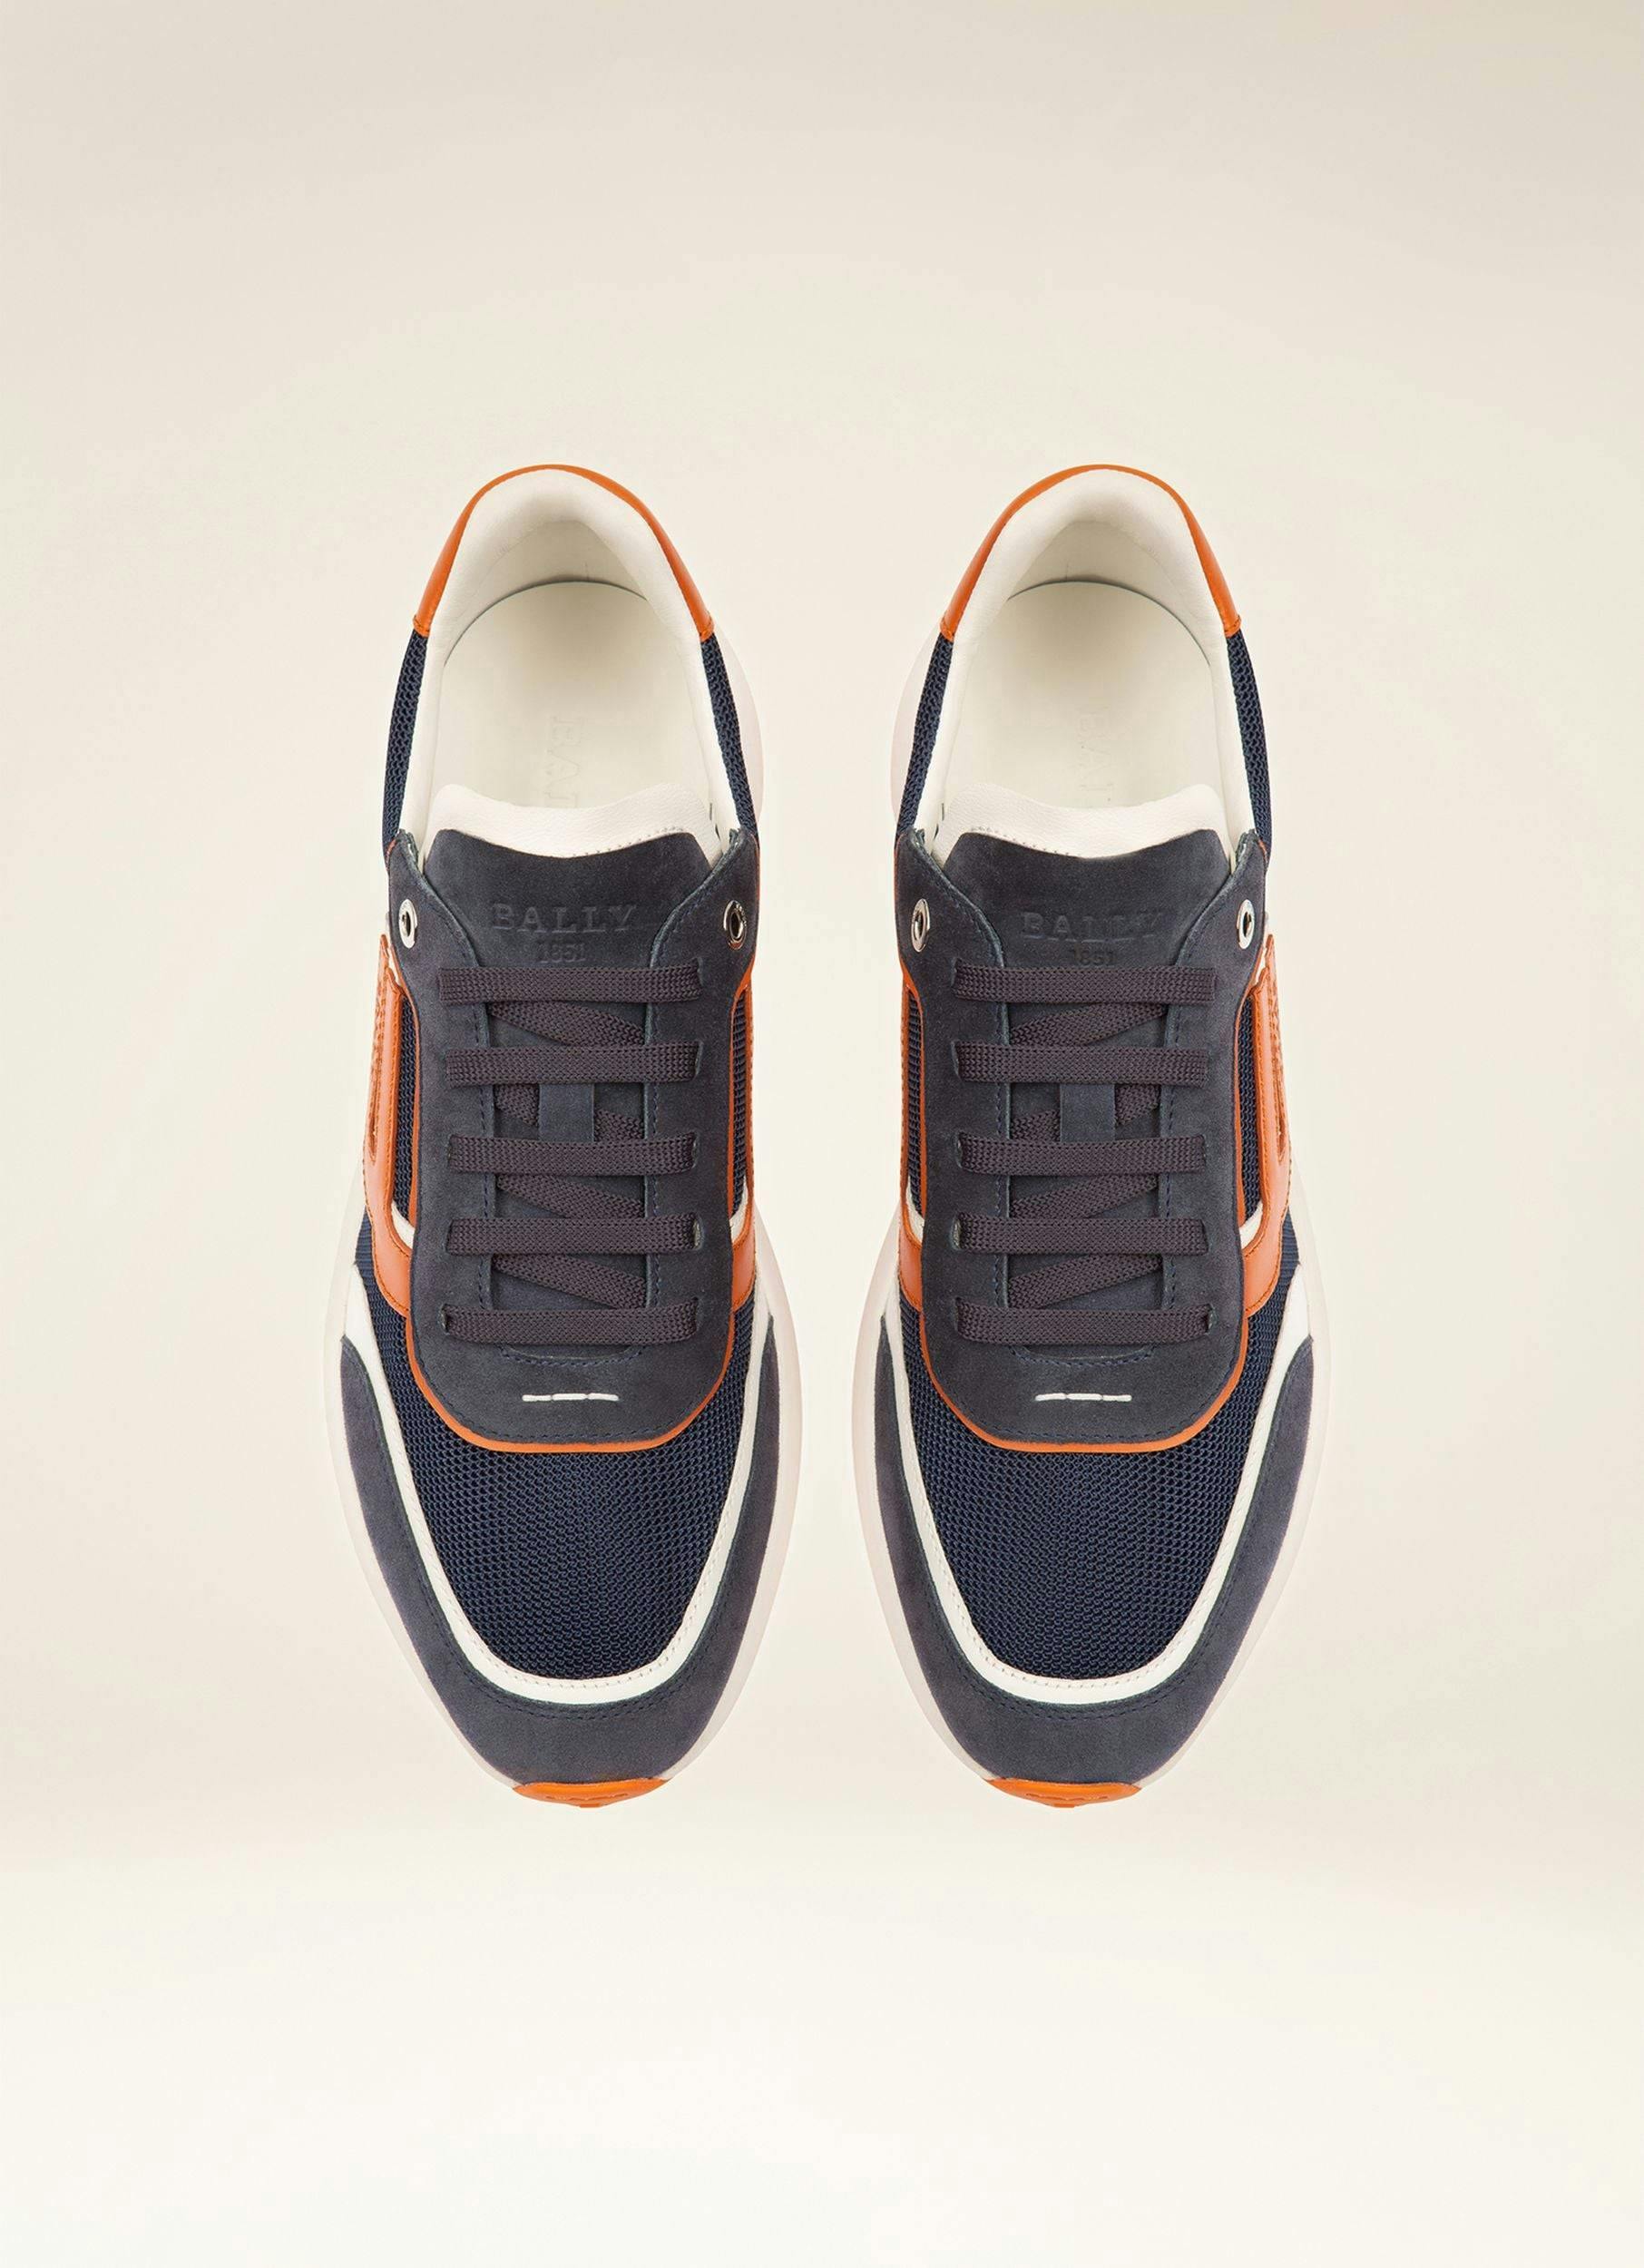 Demmy Mesh & Leather Sneakers In Navy & White - Men's - Bally - 04